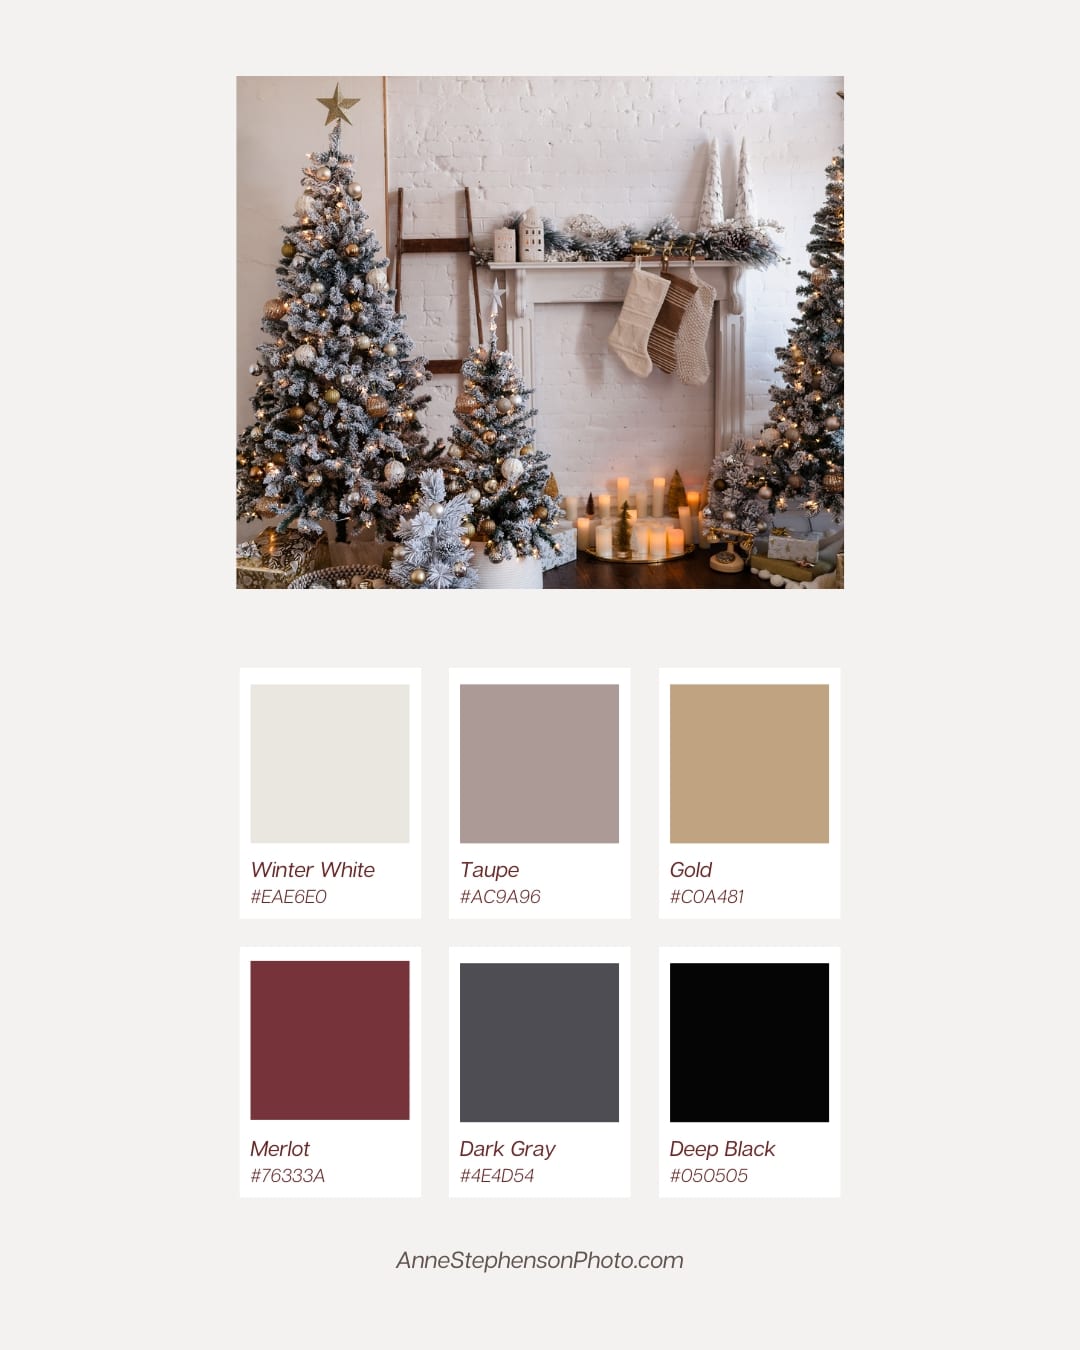 Color chips of various holiday colors to inspire clothing choices: merlot, gray, black, gold, taupe and winter white.